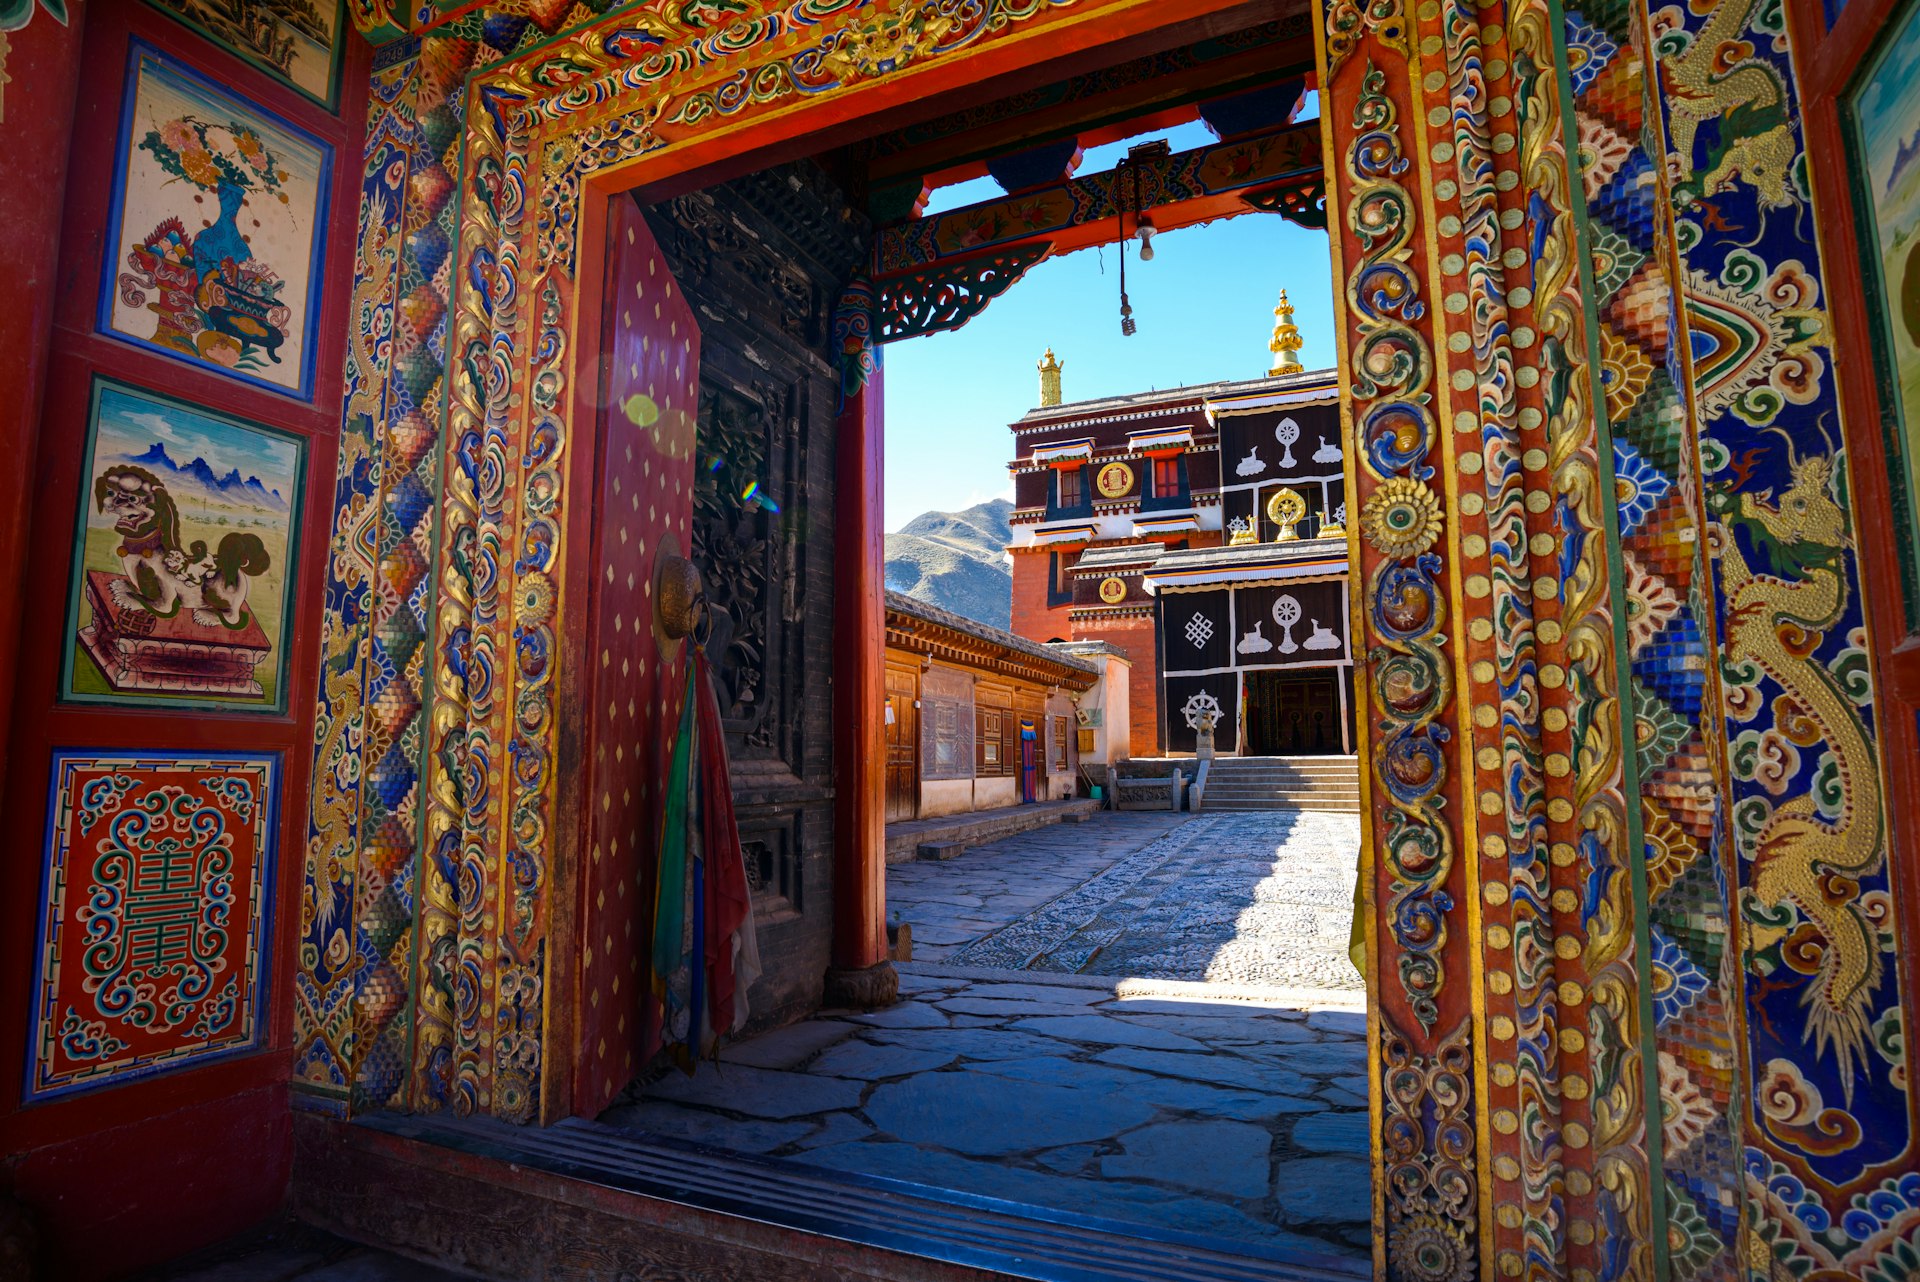 An ornate doorway in a temple complex with colorful patterns surrounding the frame